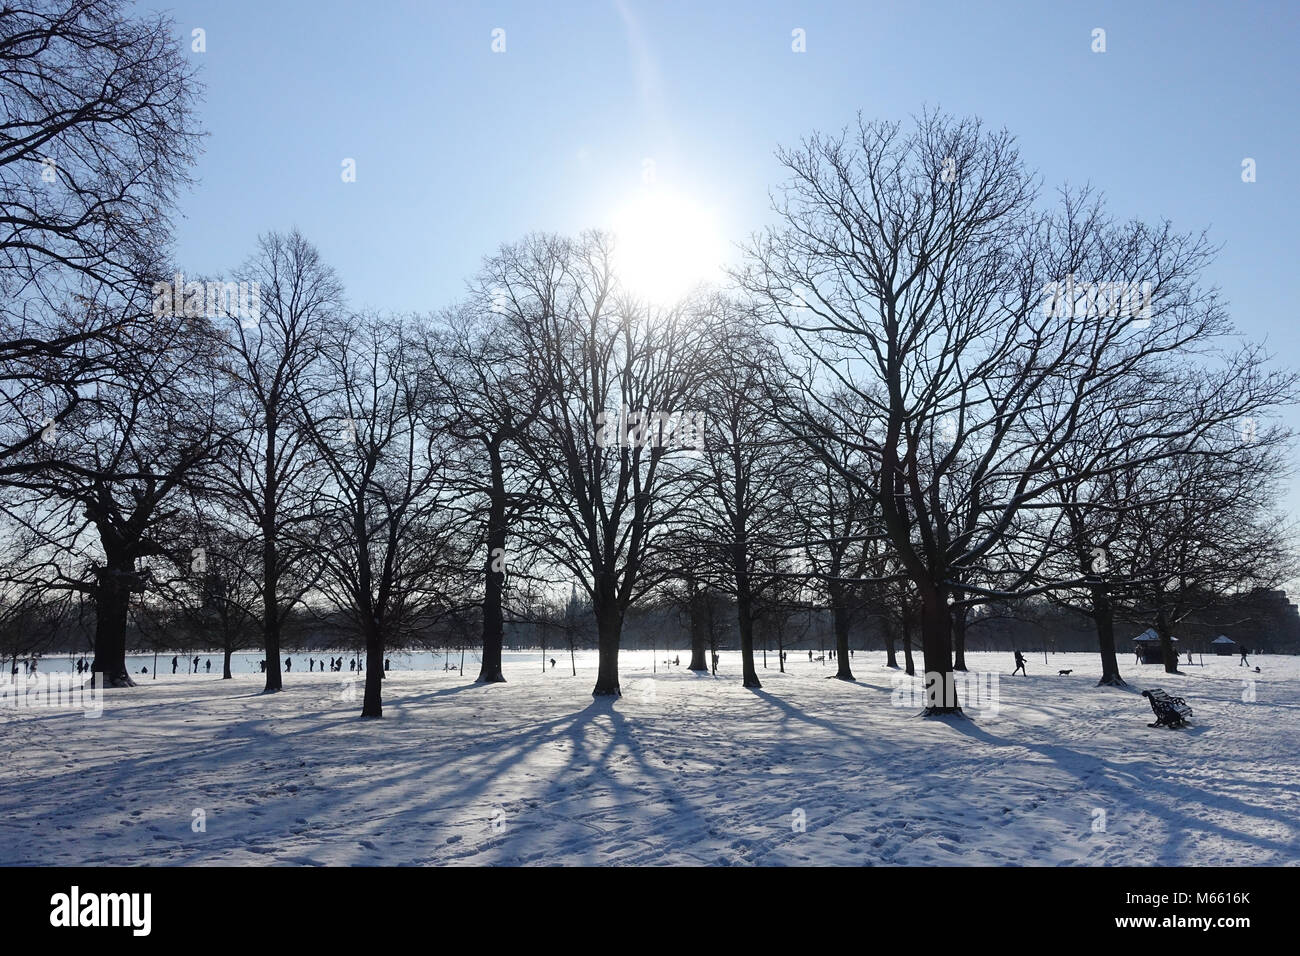 View of silhouetted trees in Kensington Gardens London casting long shadows on snow from the Beast from the East cold spell in February 2018 Stock Photo